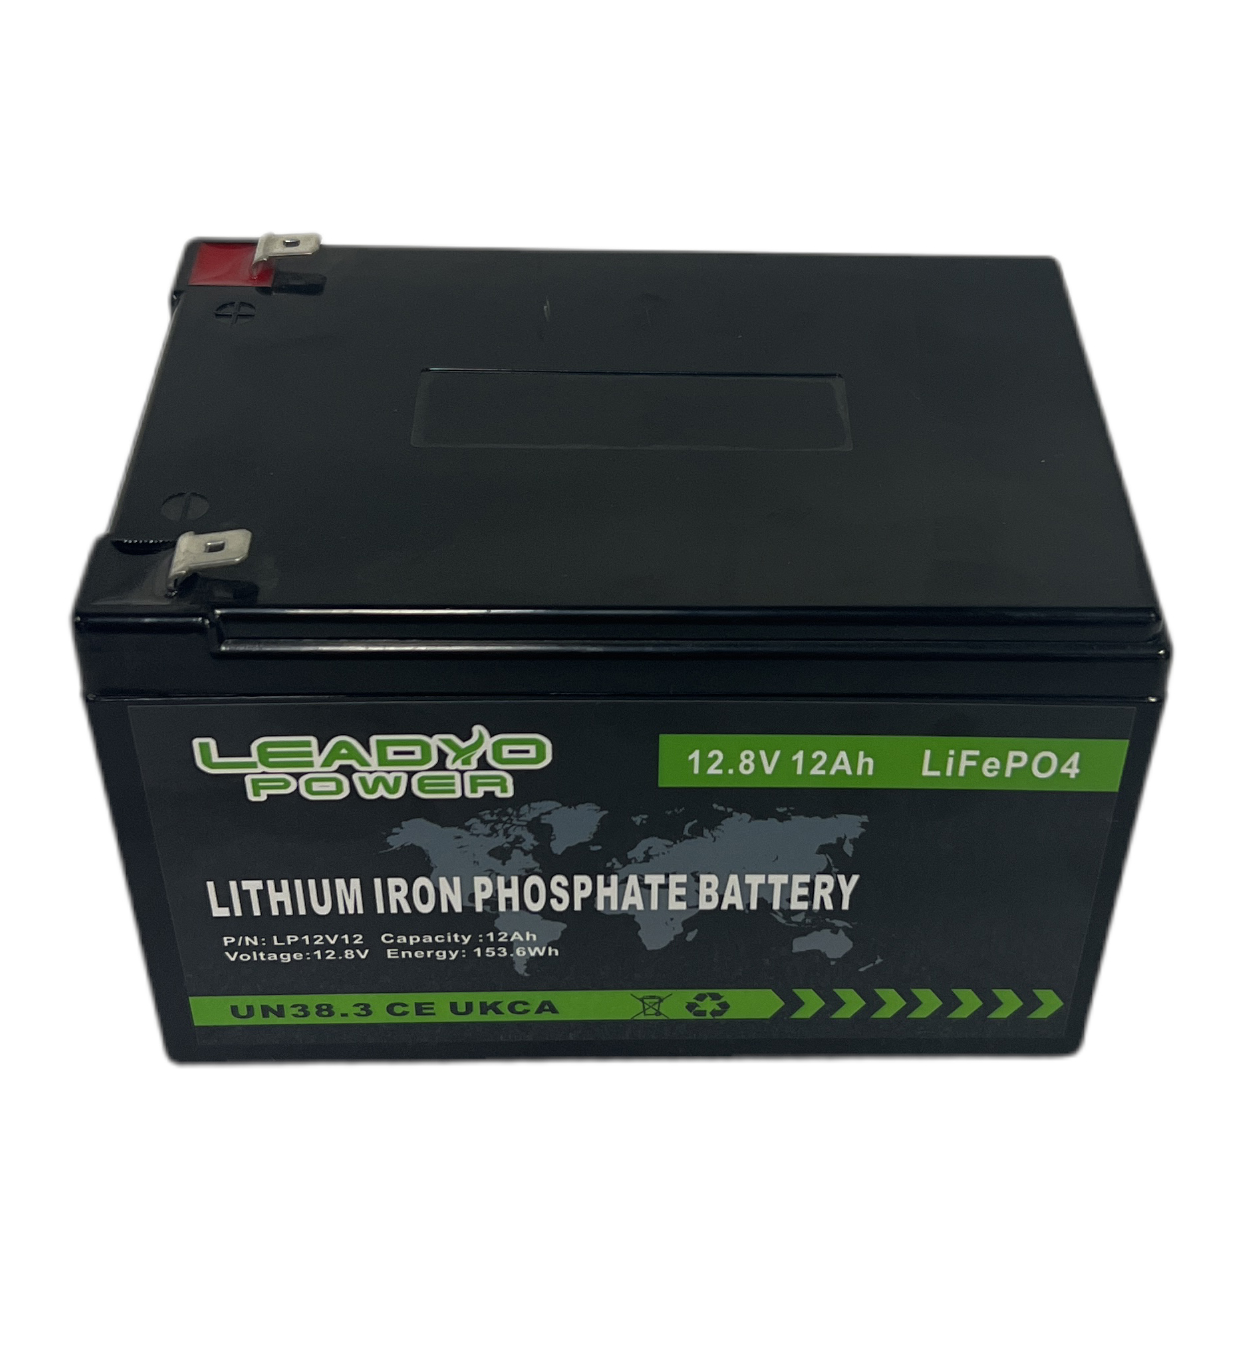 Experience Longevity and Reliability with Leadyo's LiFePO4 Batteries